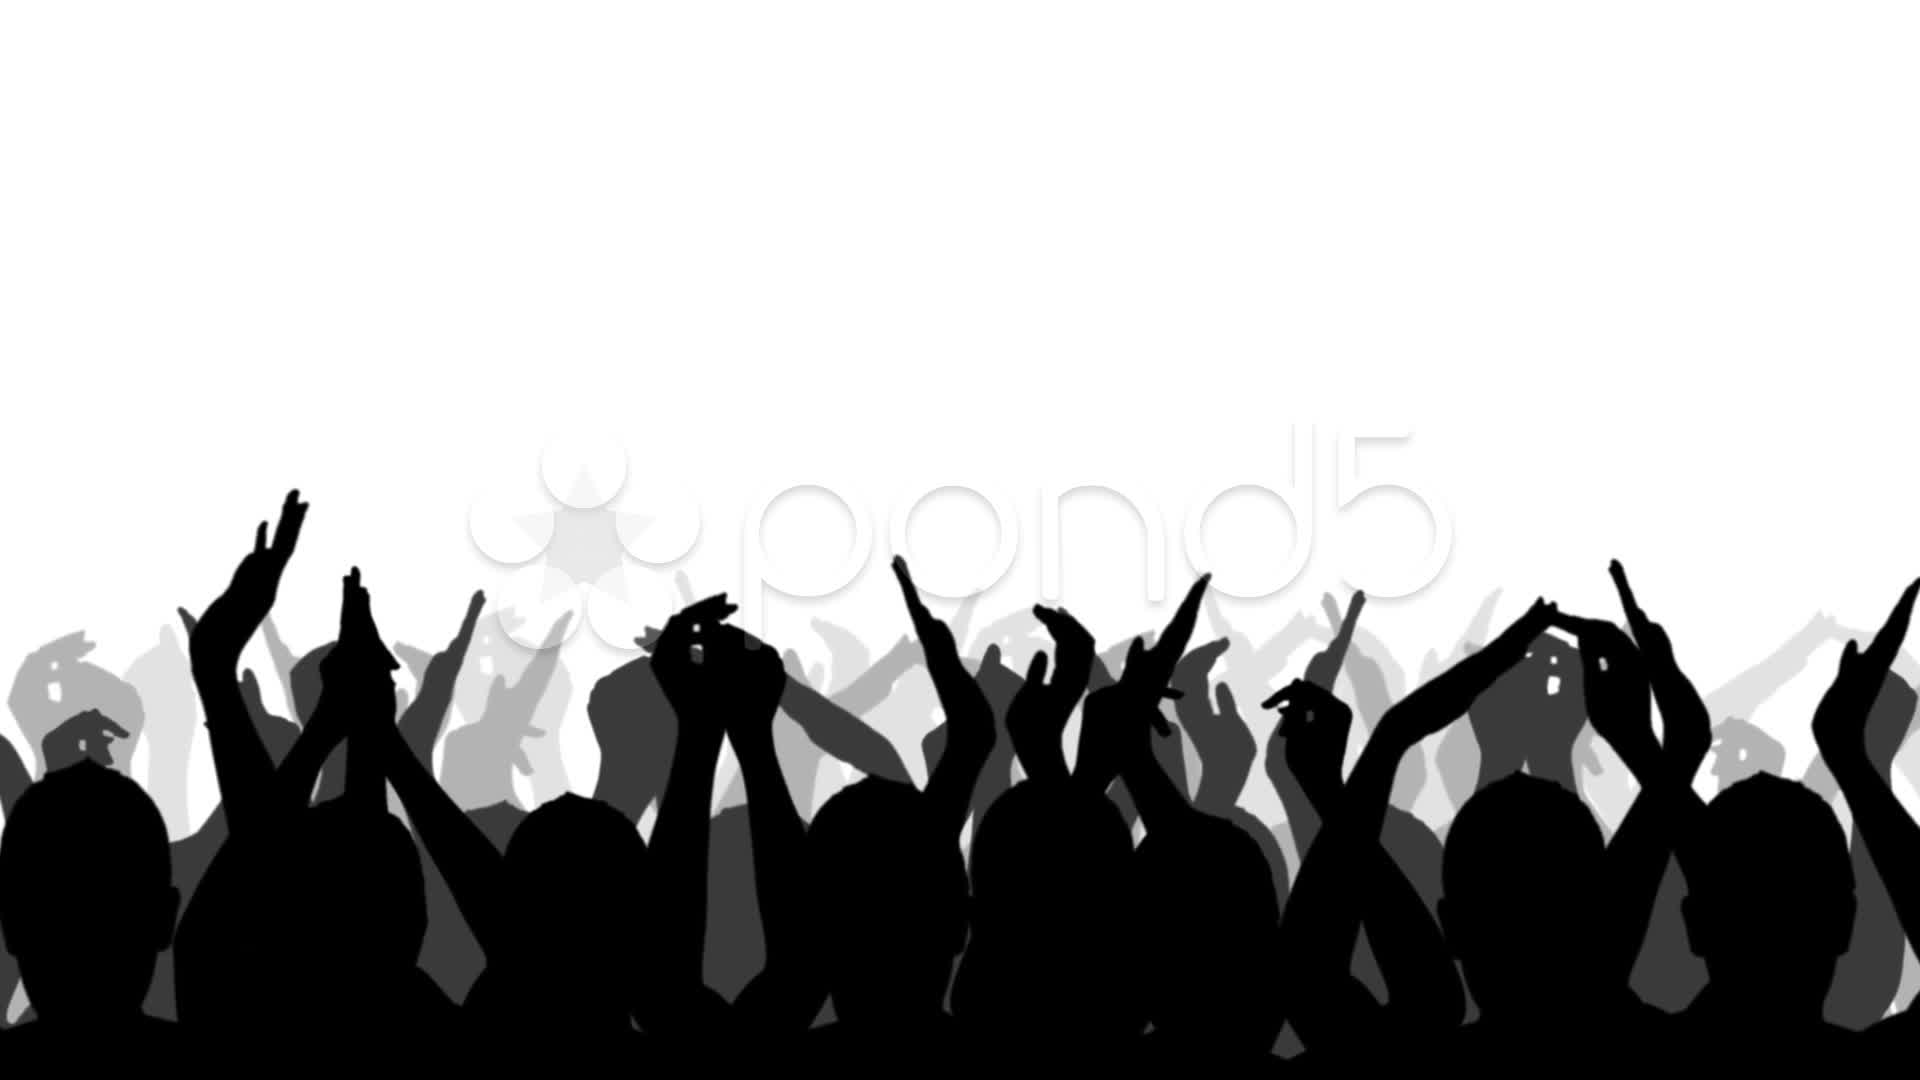 Cheering crowd clipart 3 » Clipart Station.